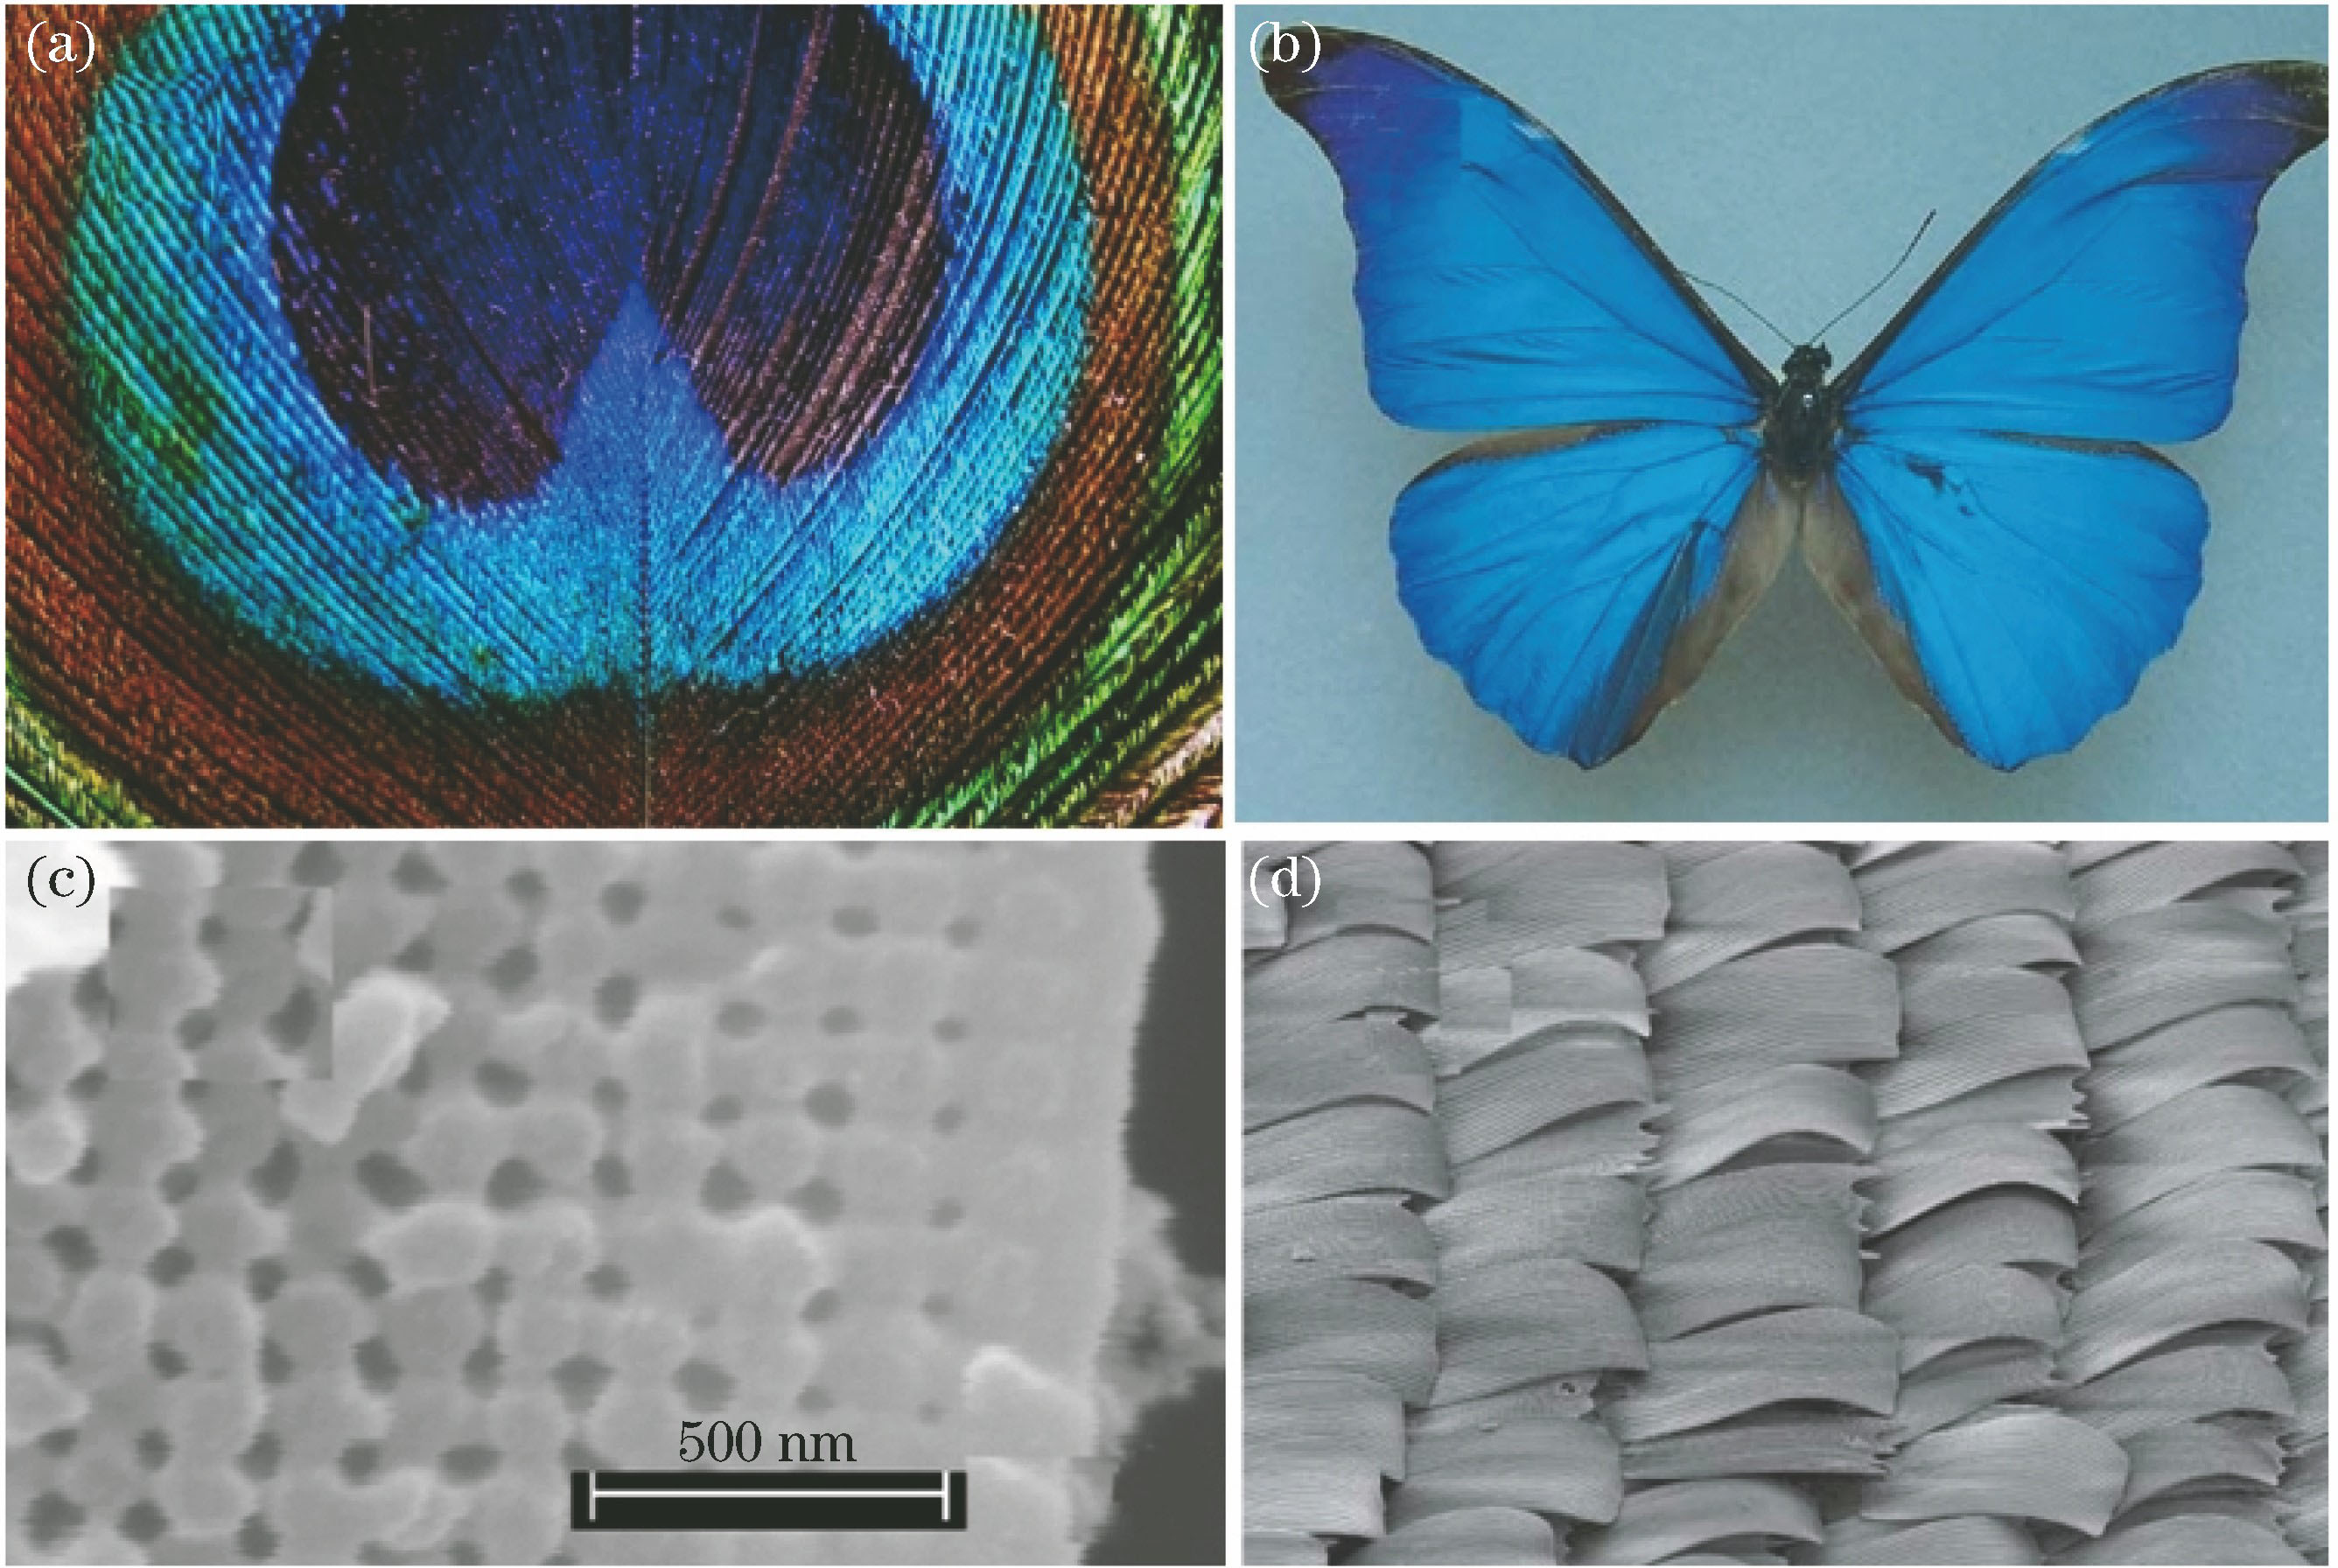 (a) Colorful feathers of peacock; (b) magnified peacock feathers observed by electron microscope; (c) blue butterfly; (d) details of butterfly wing observed by electron microscope